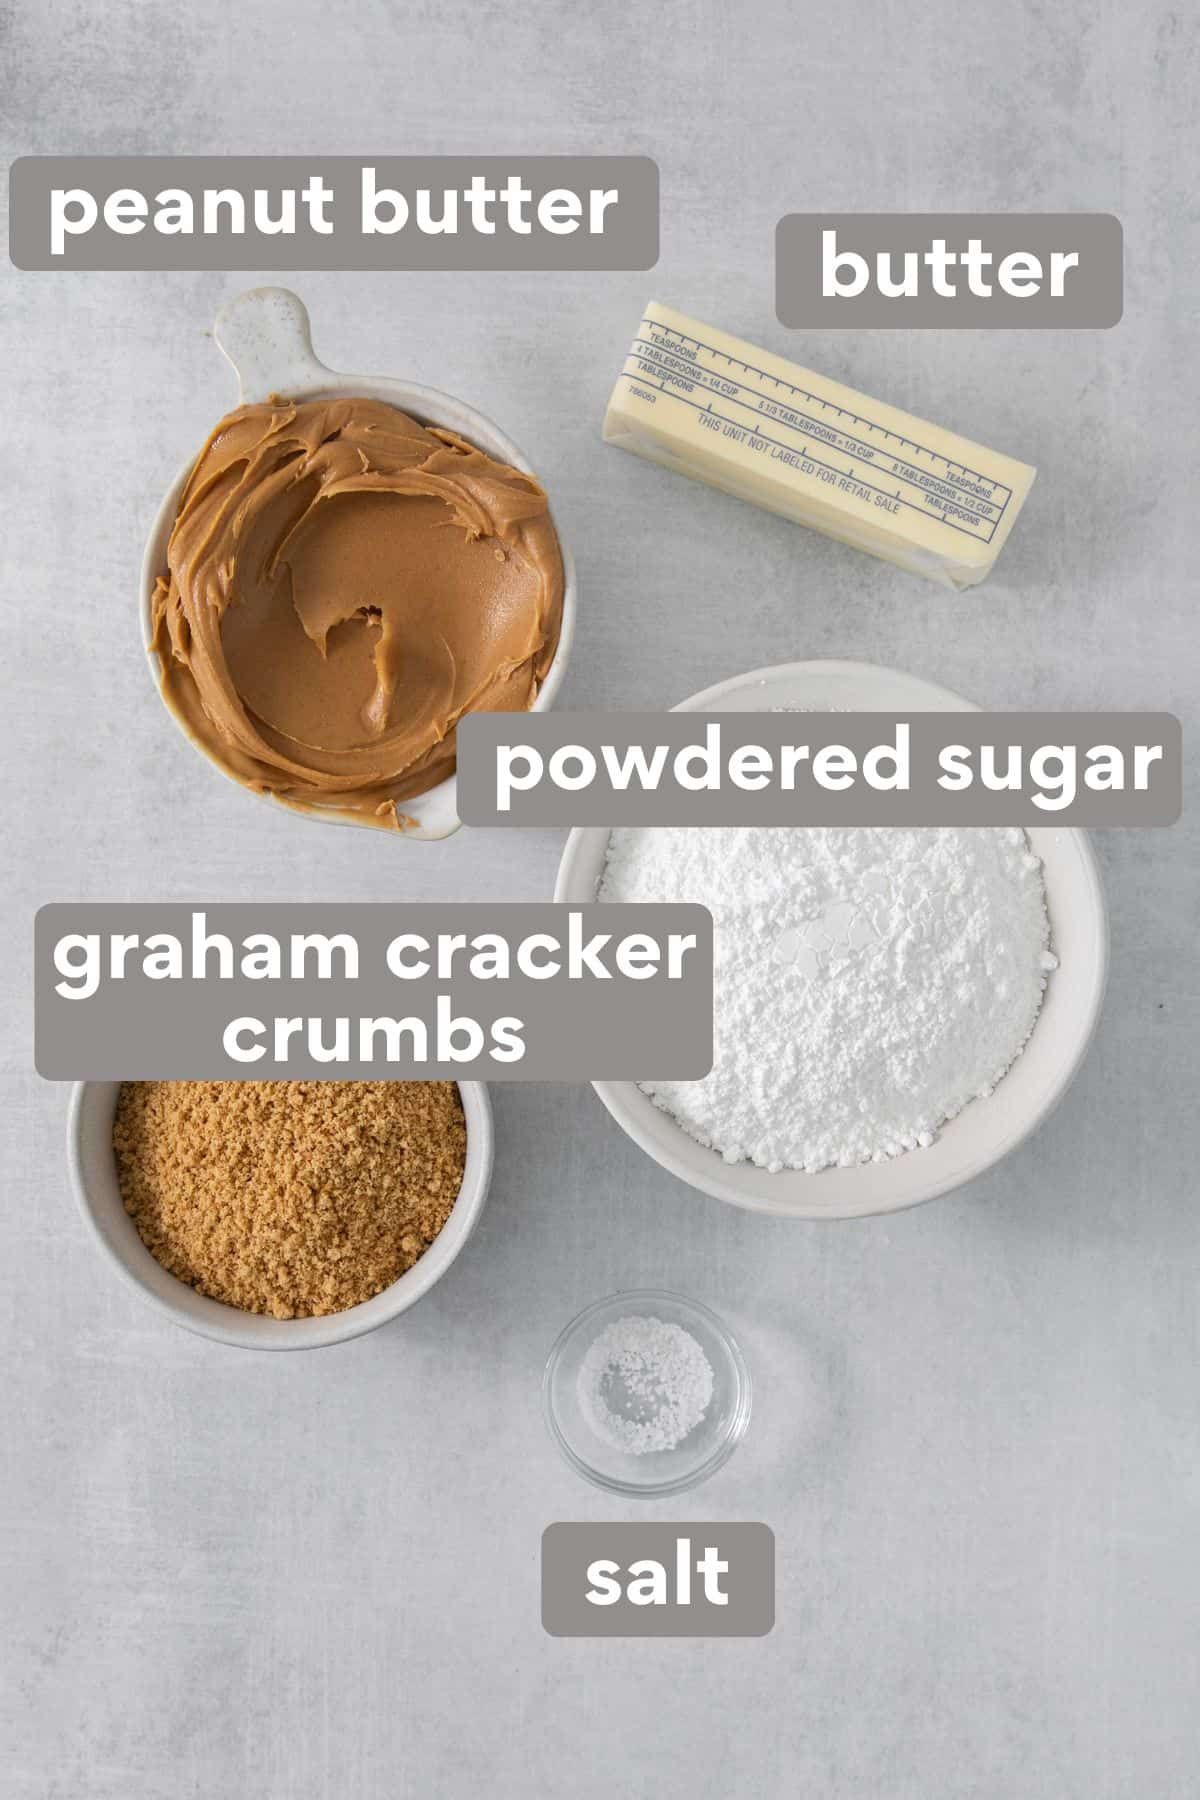 Peanut butter bar ingredients on a countertop